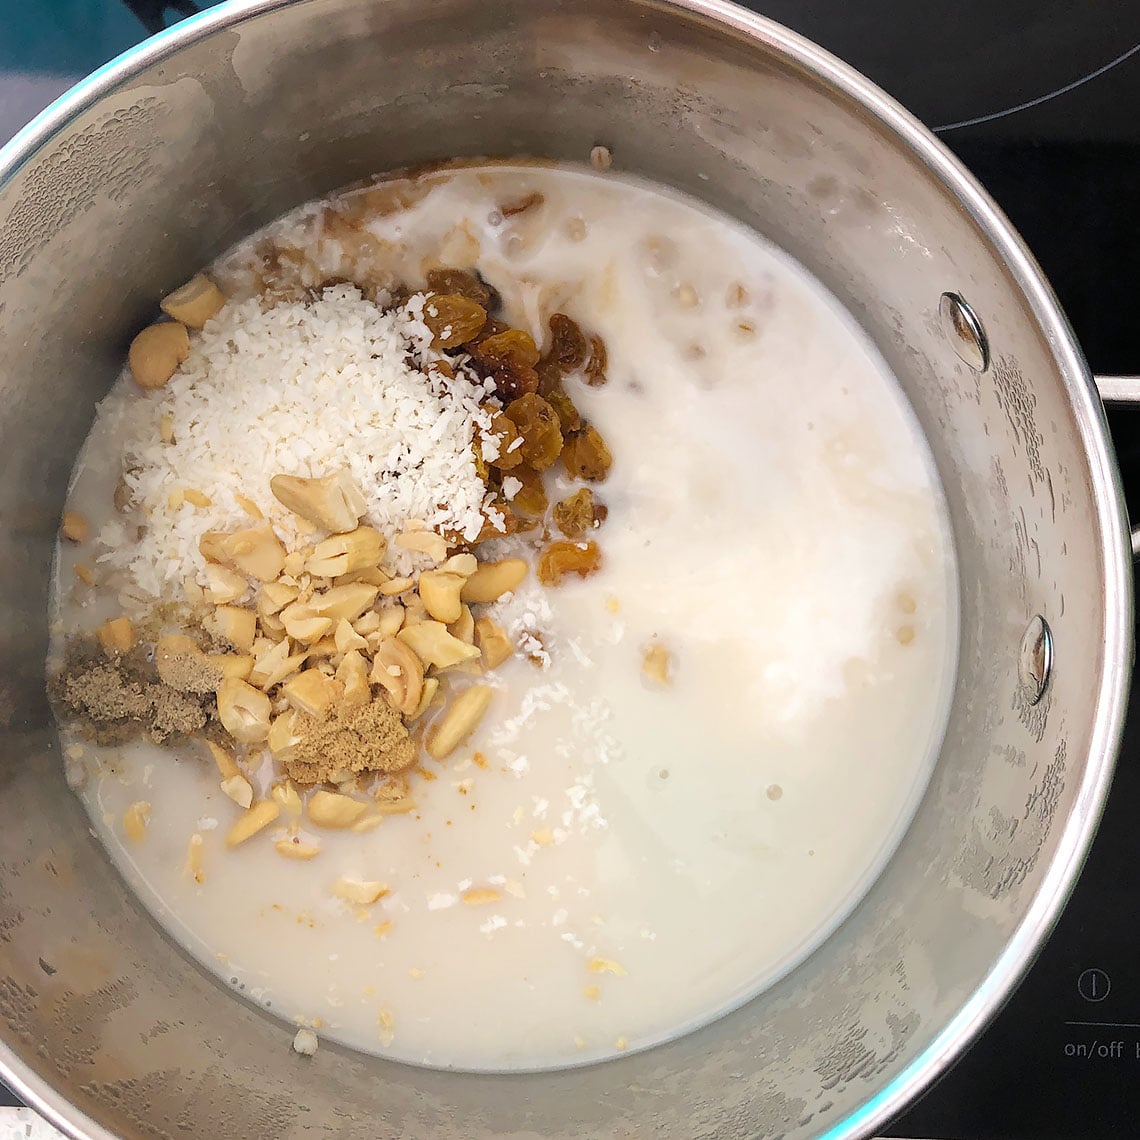 Top-down view of ingredients added to the cooked barley. These are cashew milk, coconut milk, chopped cashews, shredded coconut, raisins, vanilla, ginger, and cardamom. This is step 2 for making 1-Pot Barley Porridge.